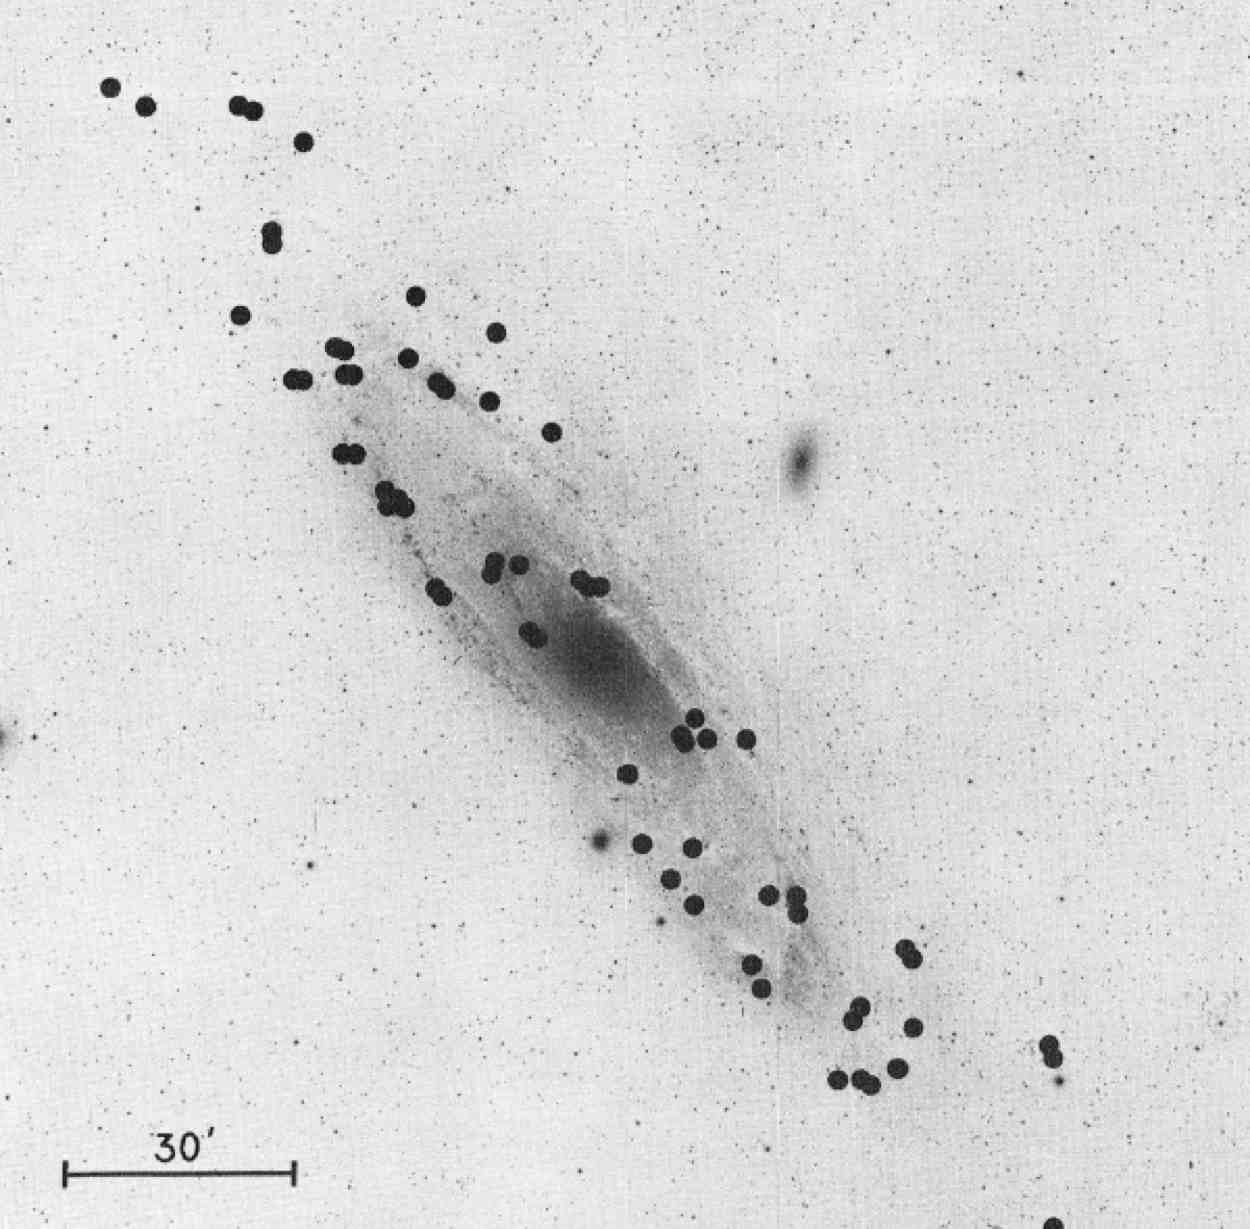 Fig. 2. Gases filling up galaxies are visible via telescopes